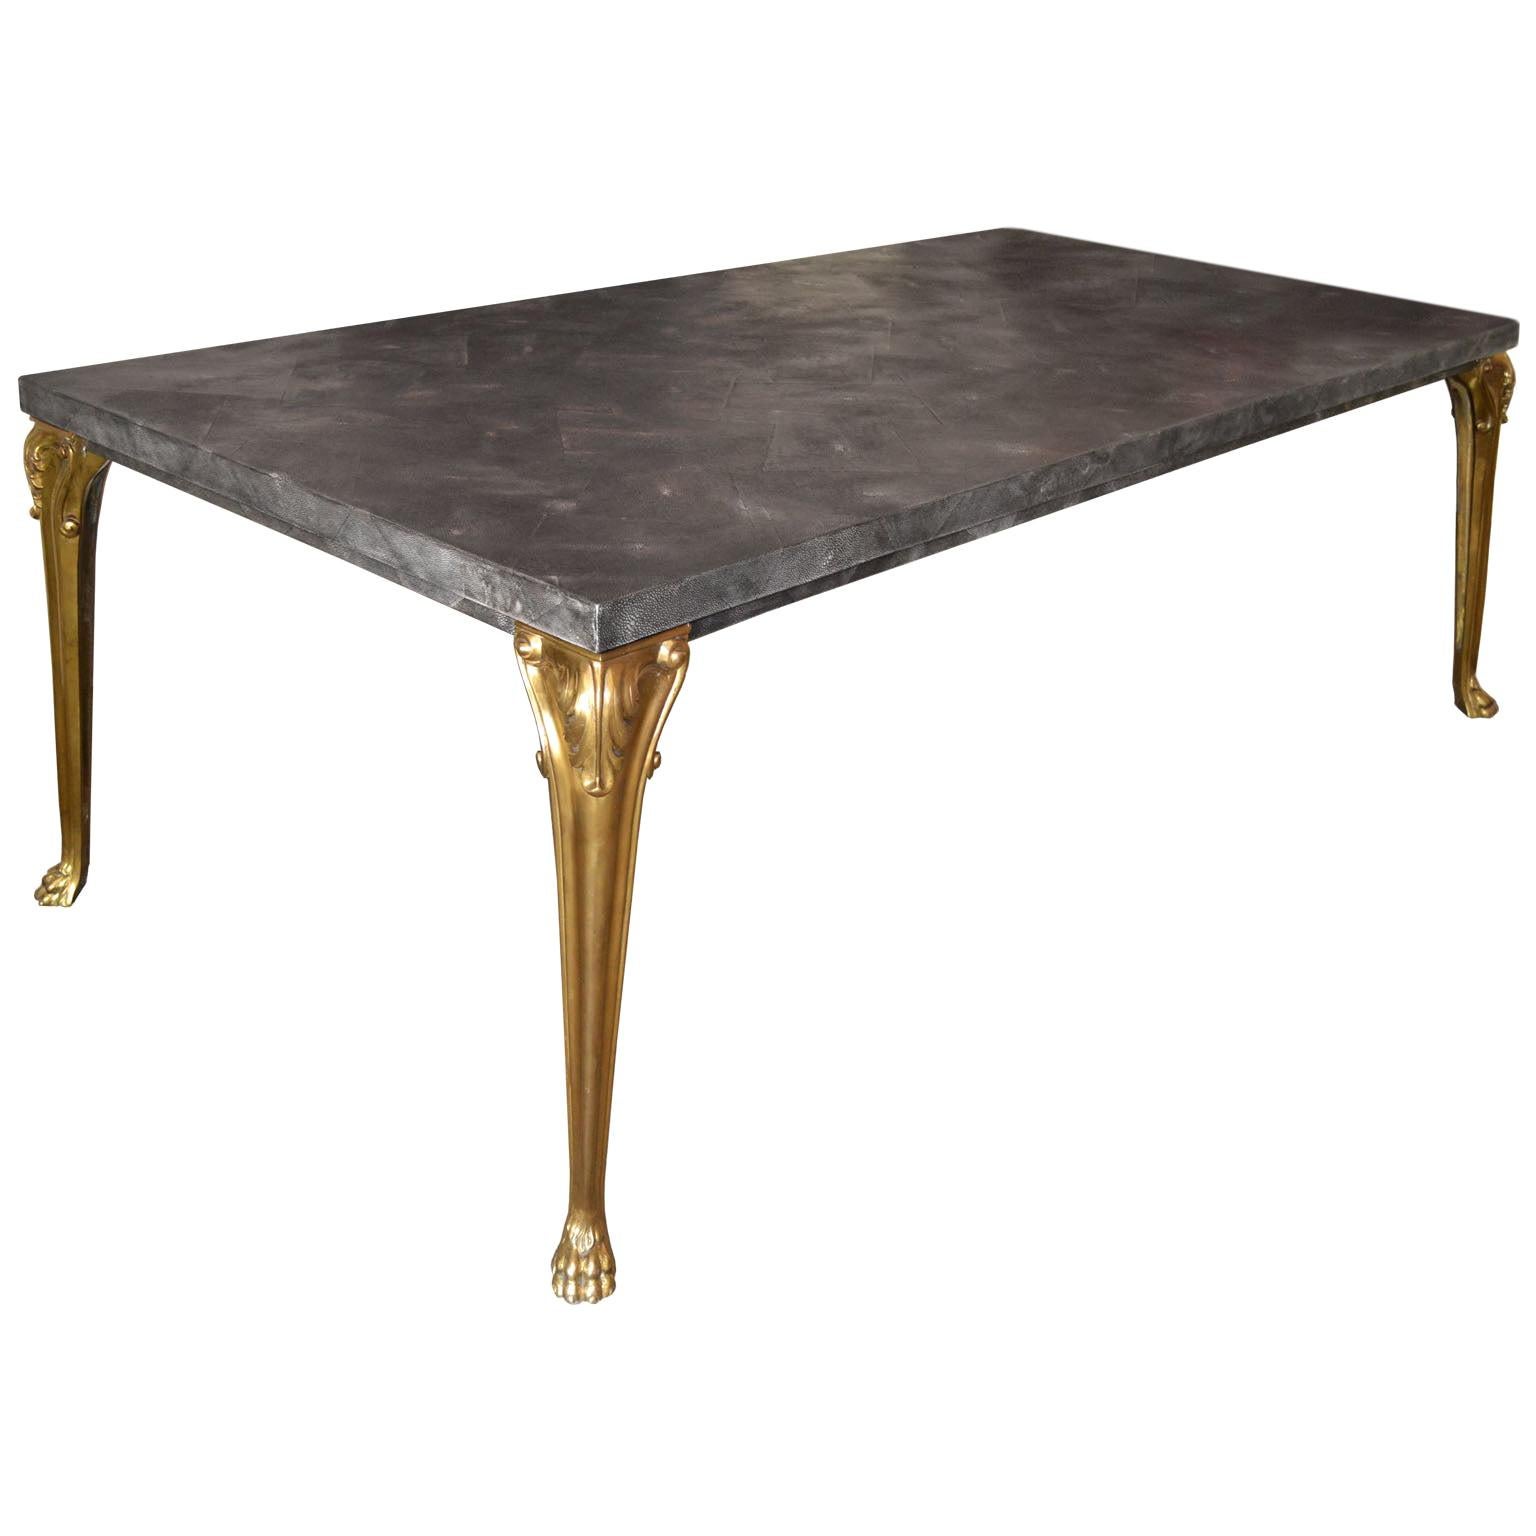 Dining Table black scagliola shagreen top  casted brass legs handmade in Italy